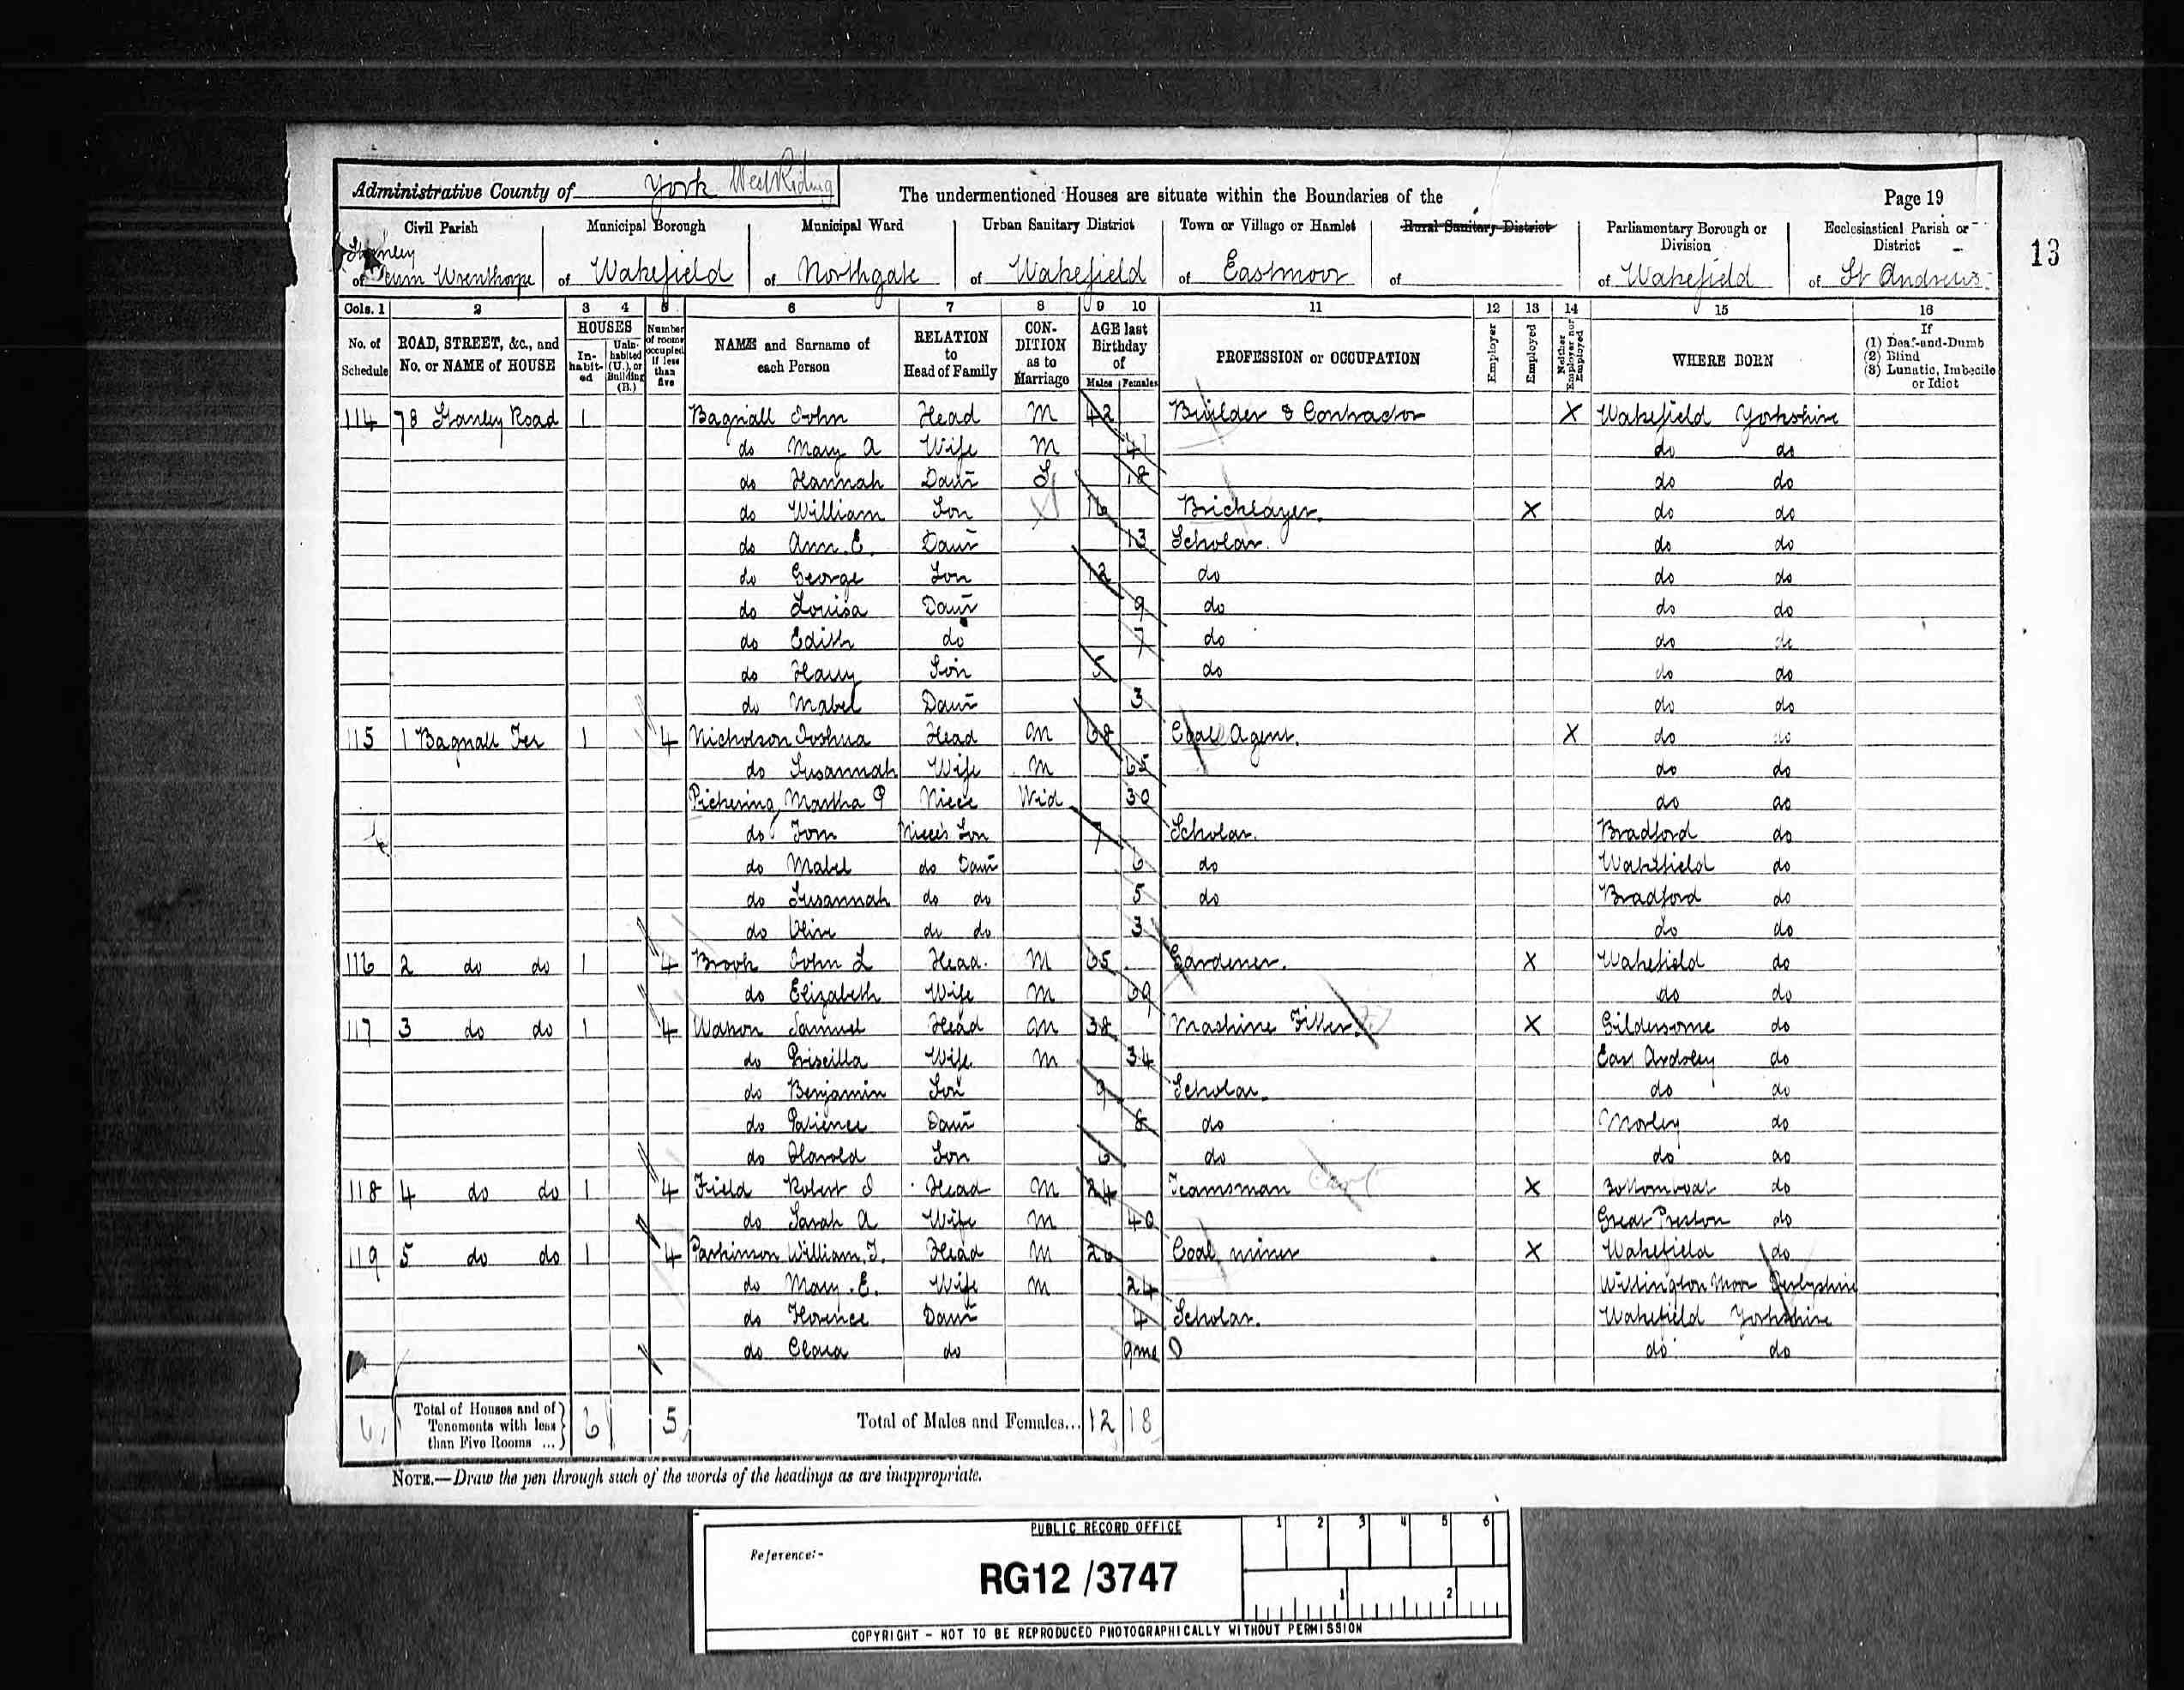 1891 Census entry for John and Mary Bagnall Household